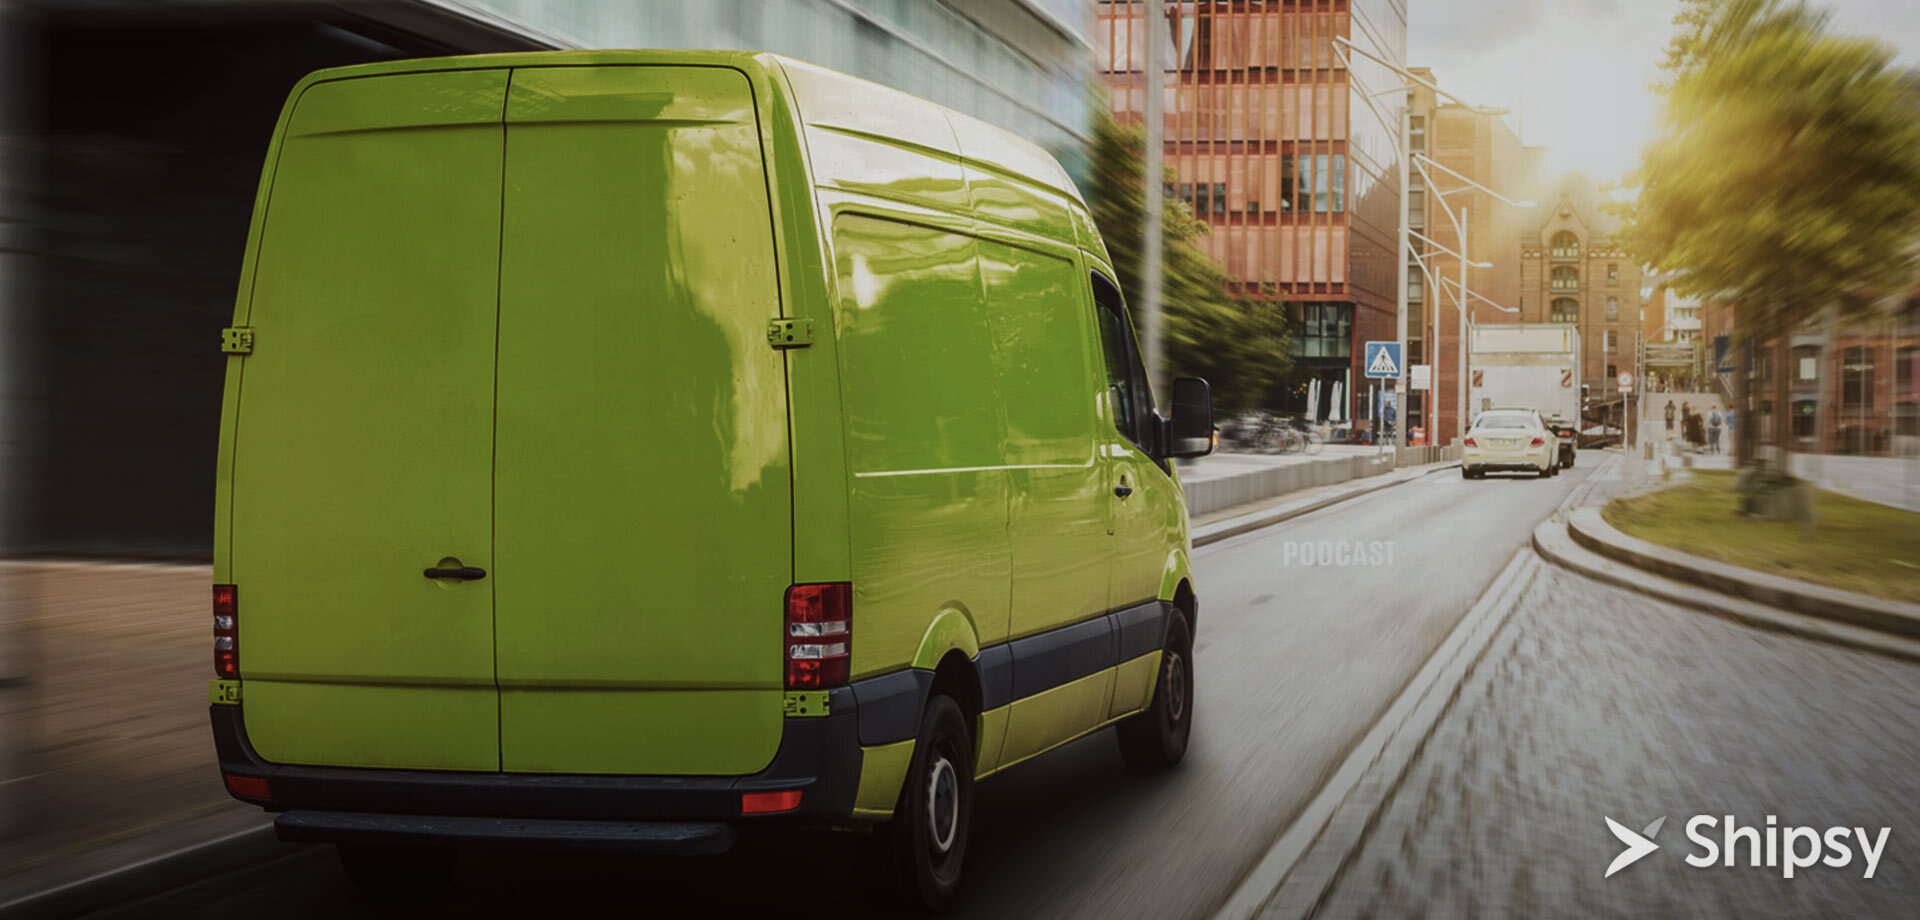 Making The Last Mile Greener: Four Best Practices For Logistics Service Providers